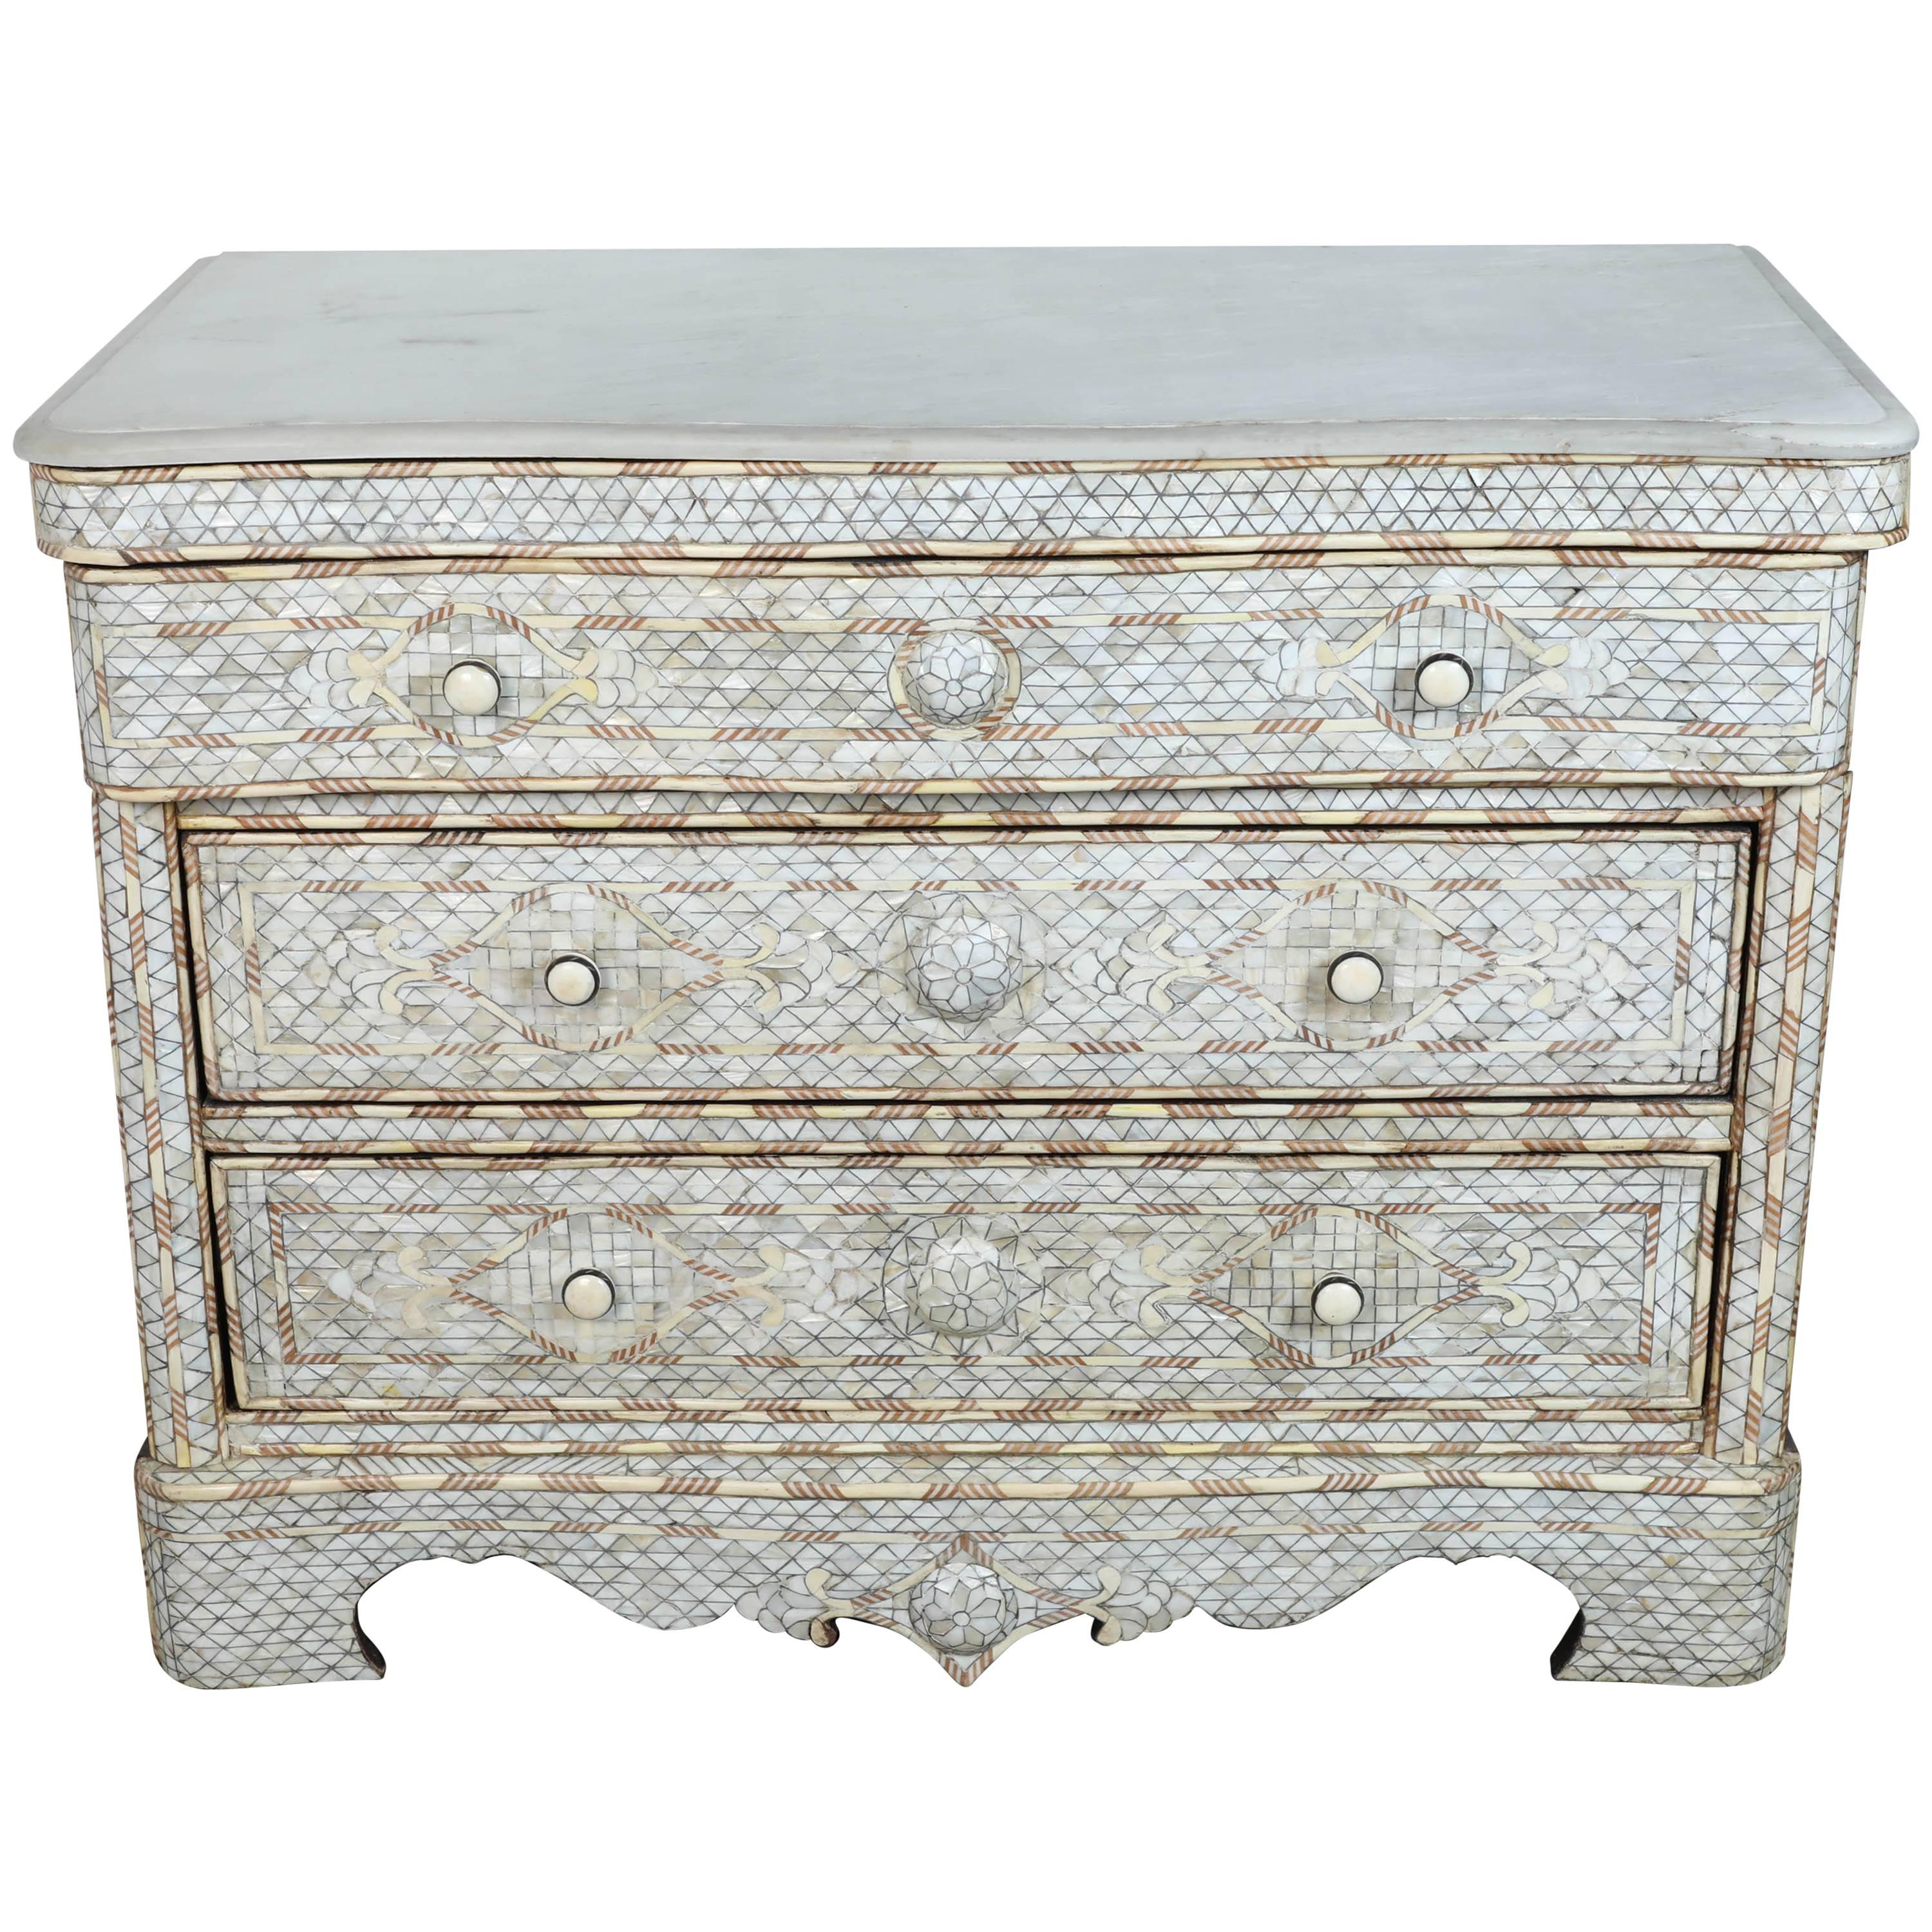 Middle Eastern Syrian White Mother-of-Pearl Inlay Wedding Dresser